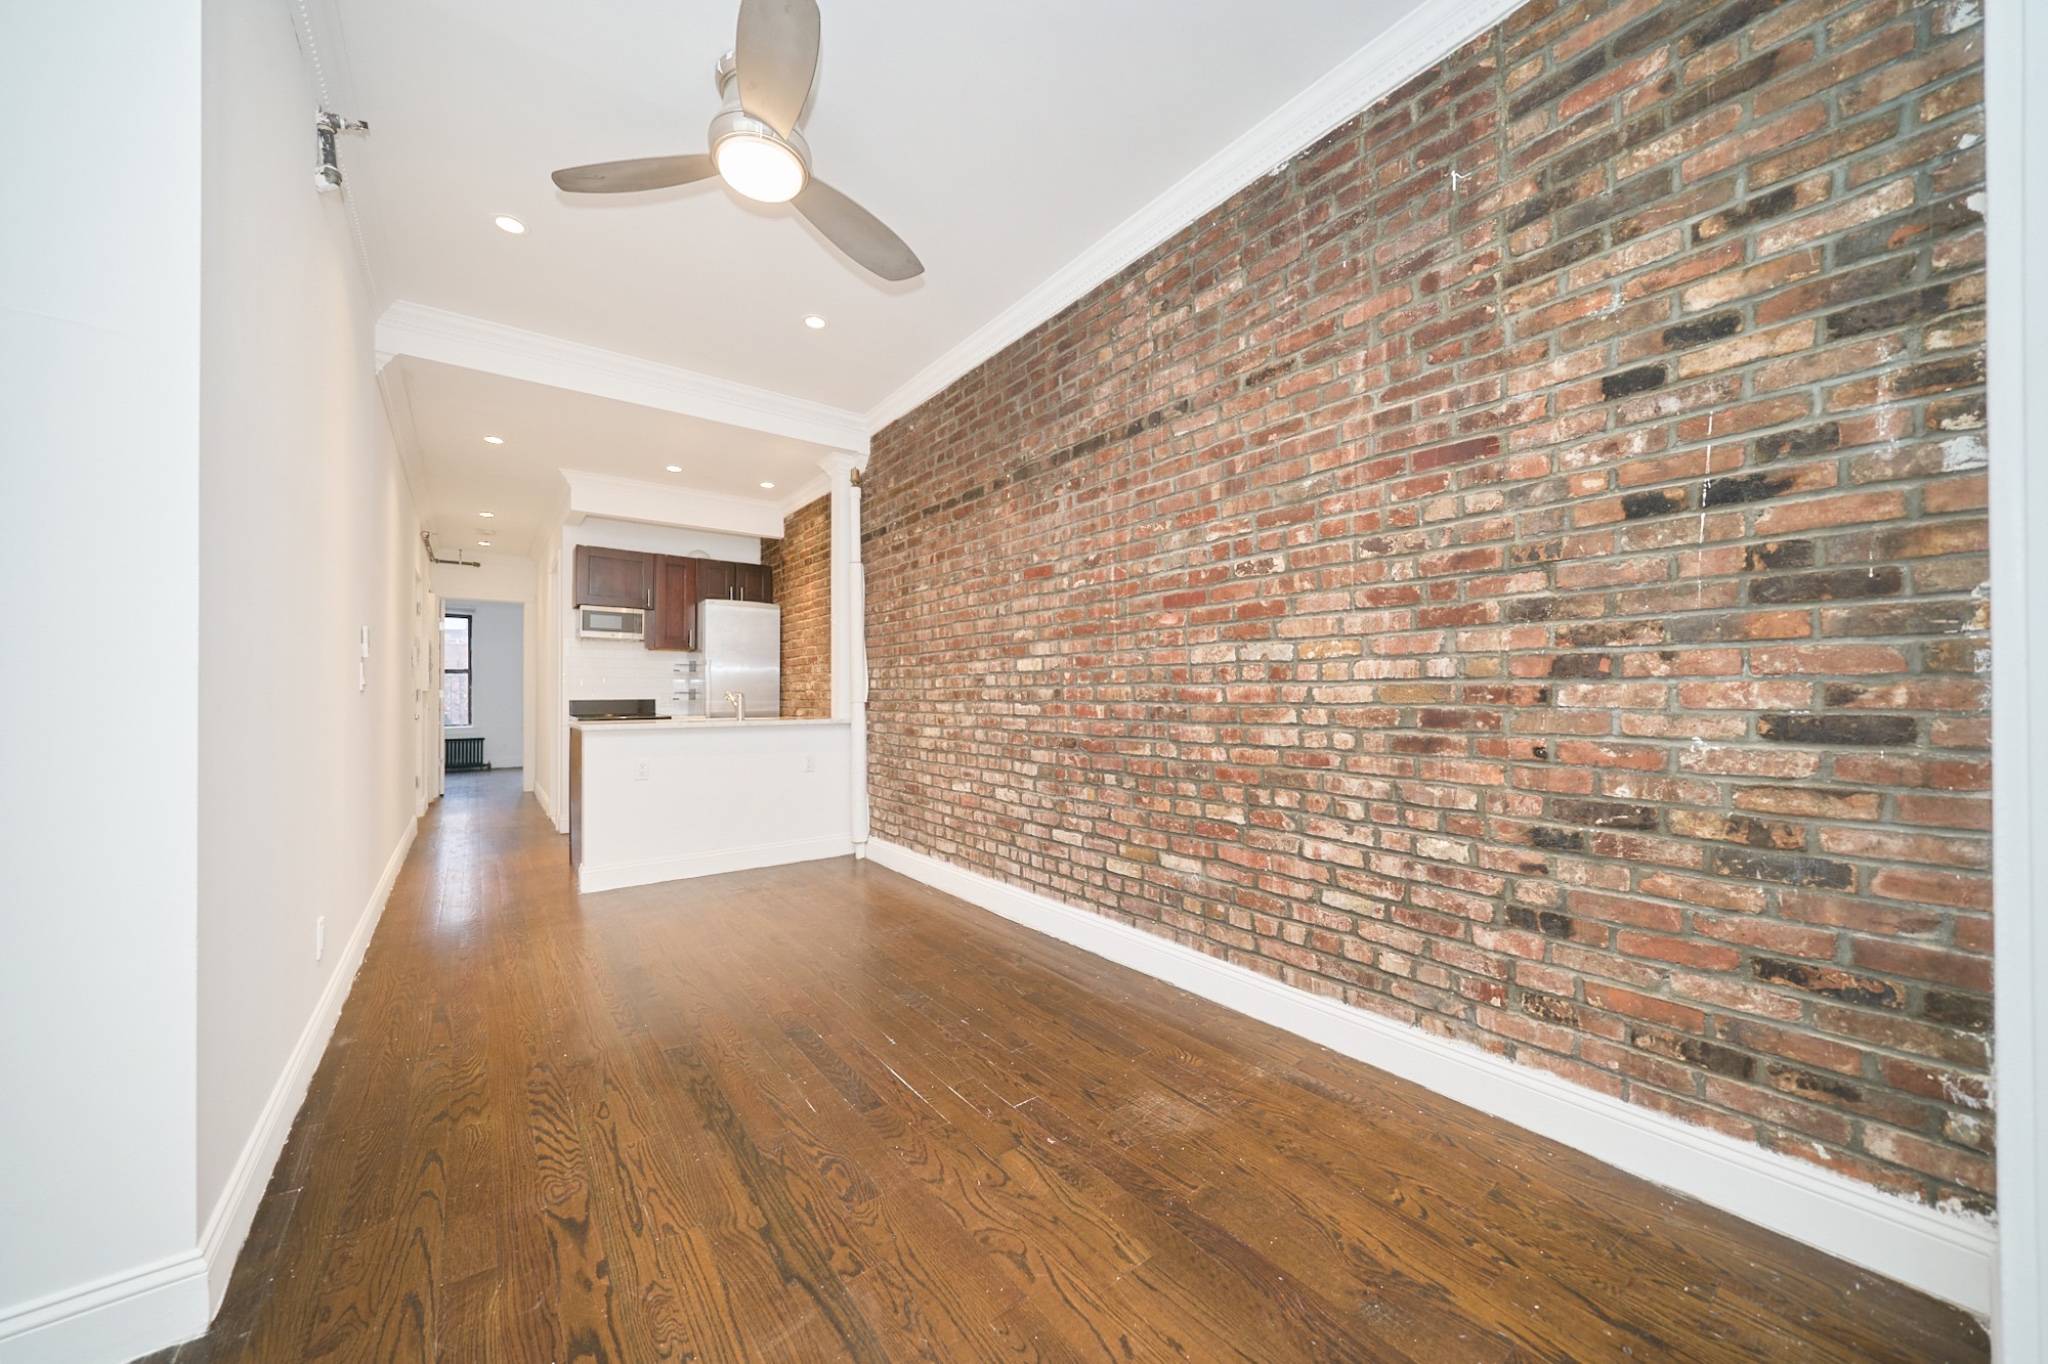 Beautiful 2 bedroom, 2 bathroom apartment in the heart of the East Village.